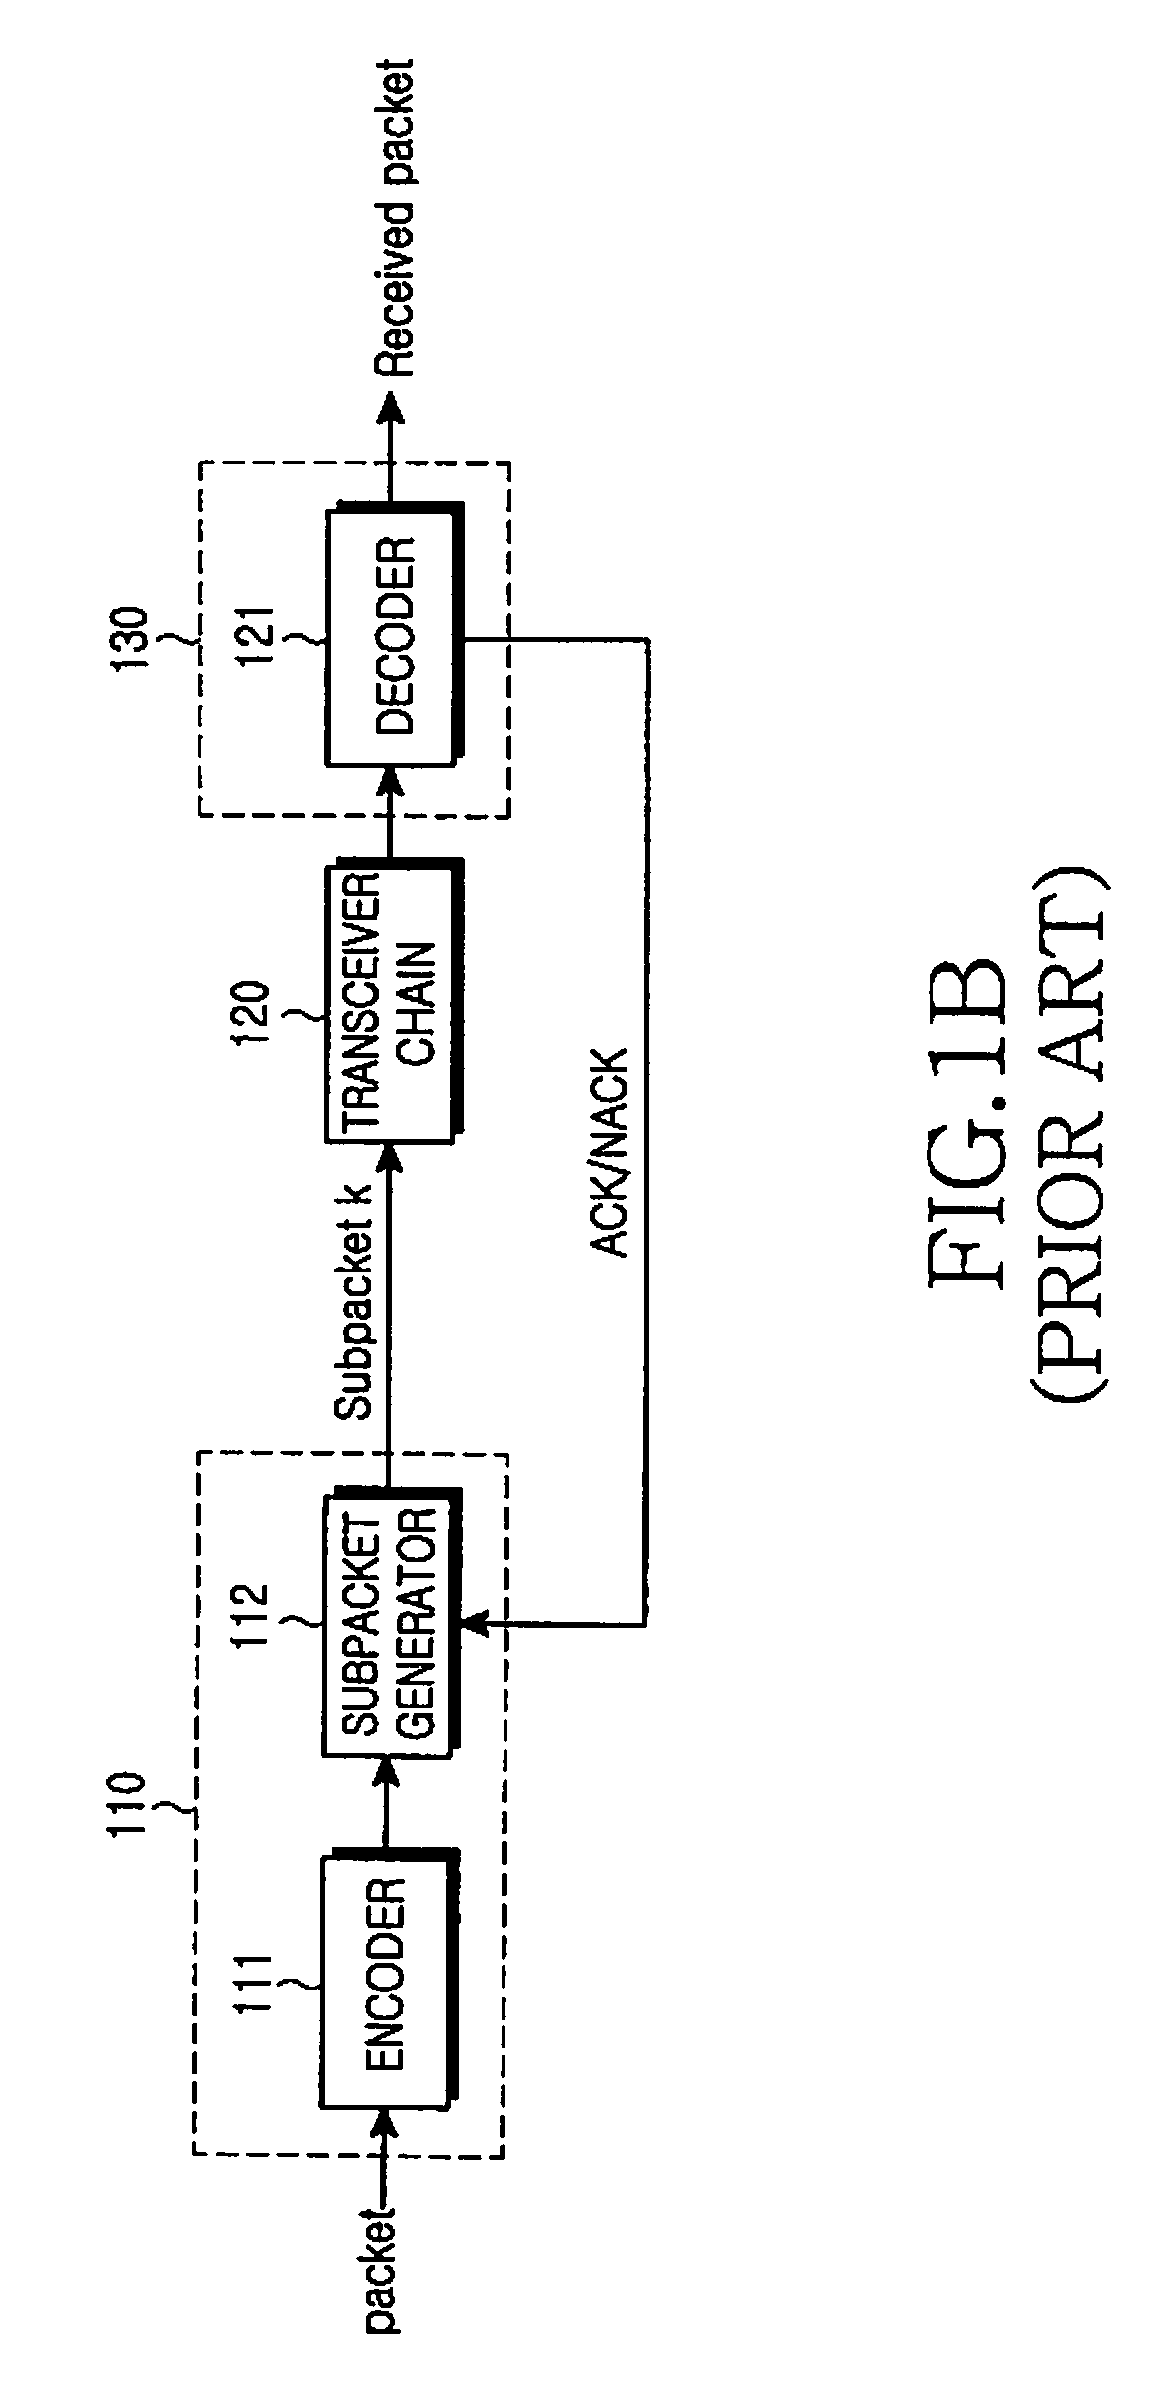 Apparatus and method for channel-interleaving and channel-deinterleaving data in a wireless communication system